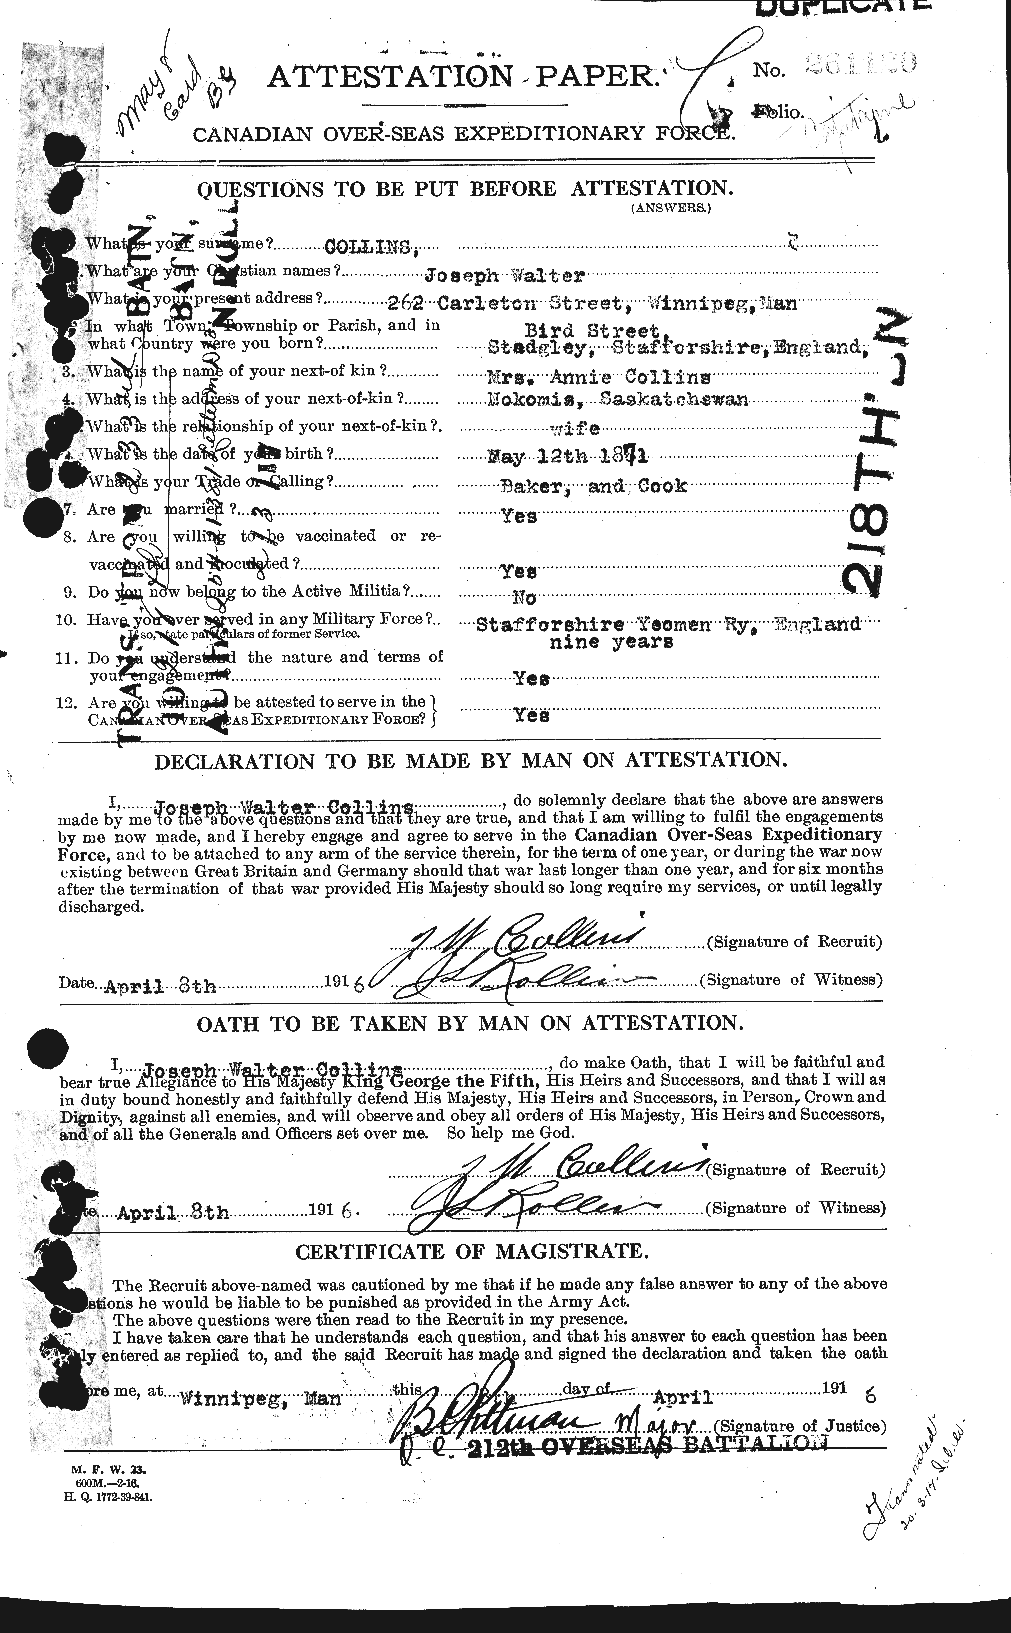 Personnel Records of the First World War - CEF 069508a